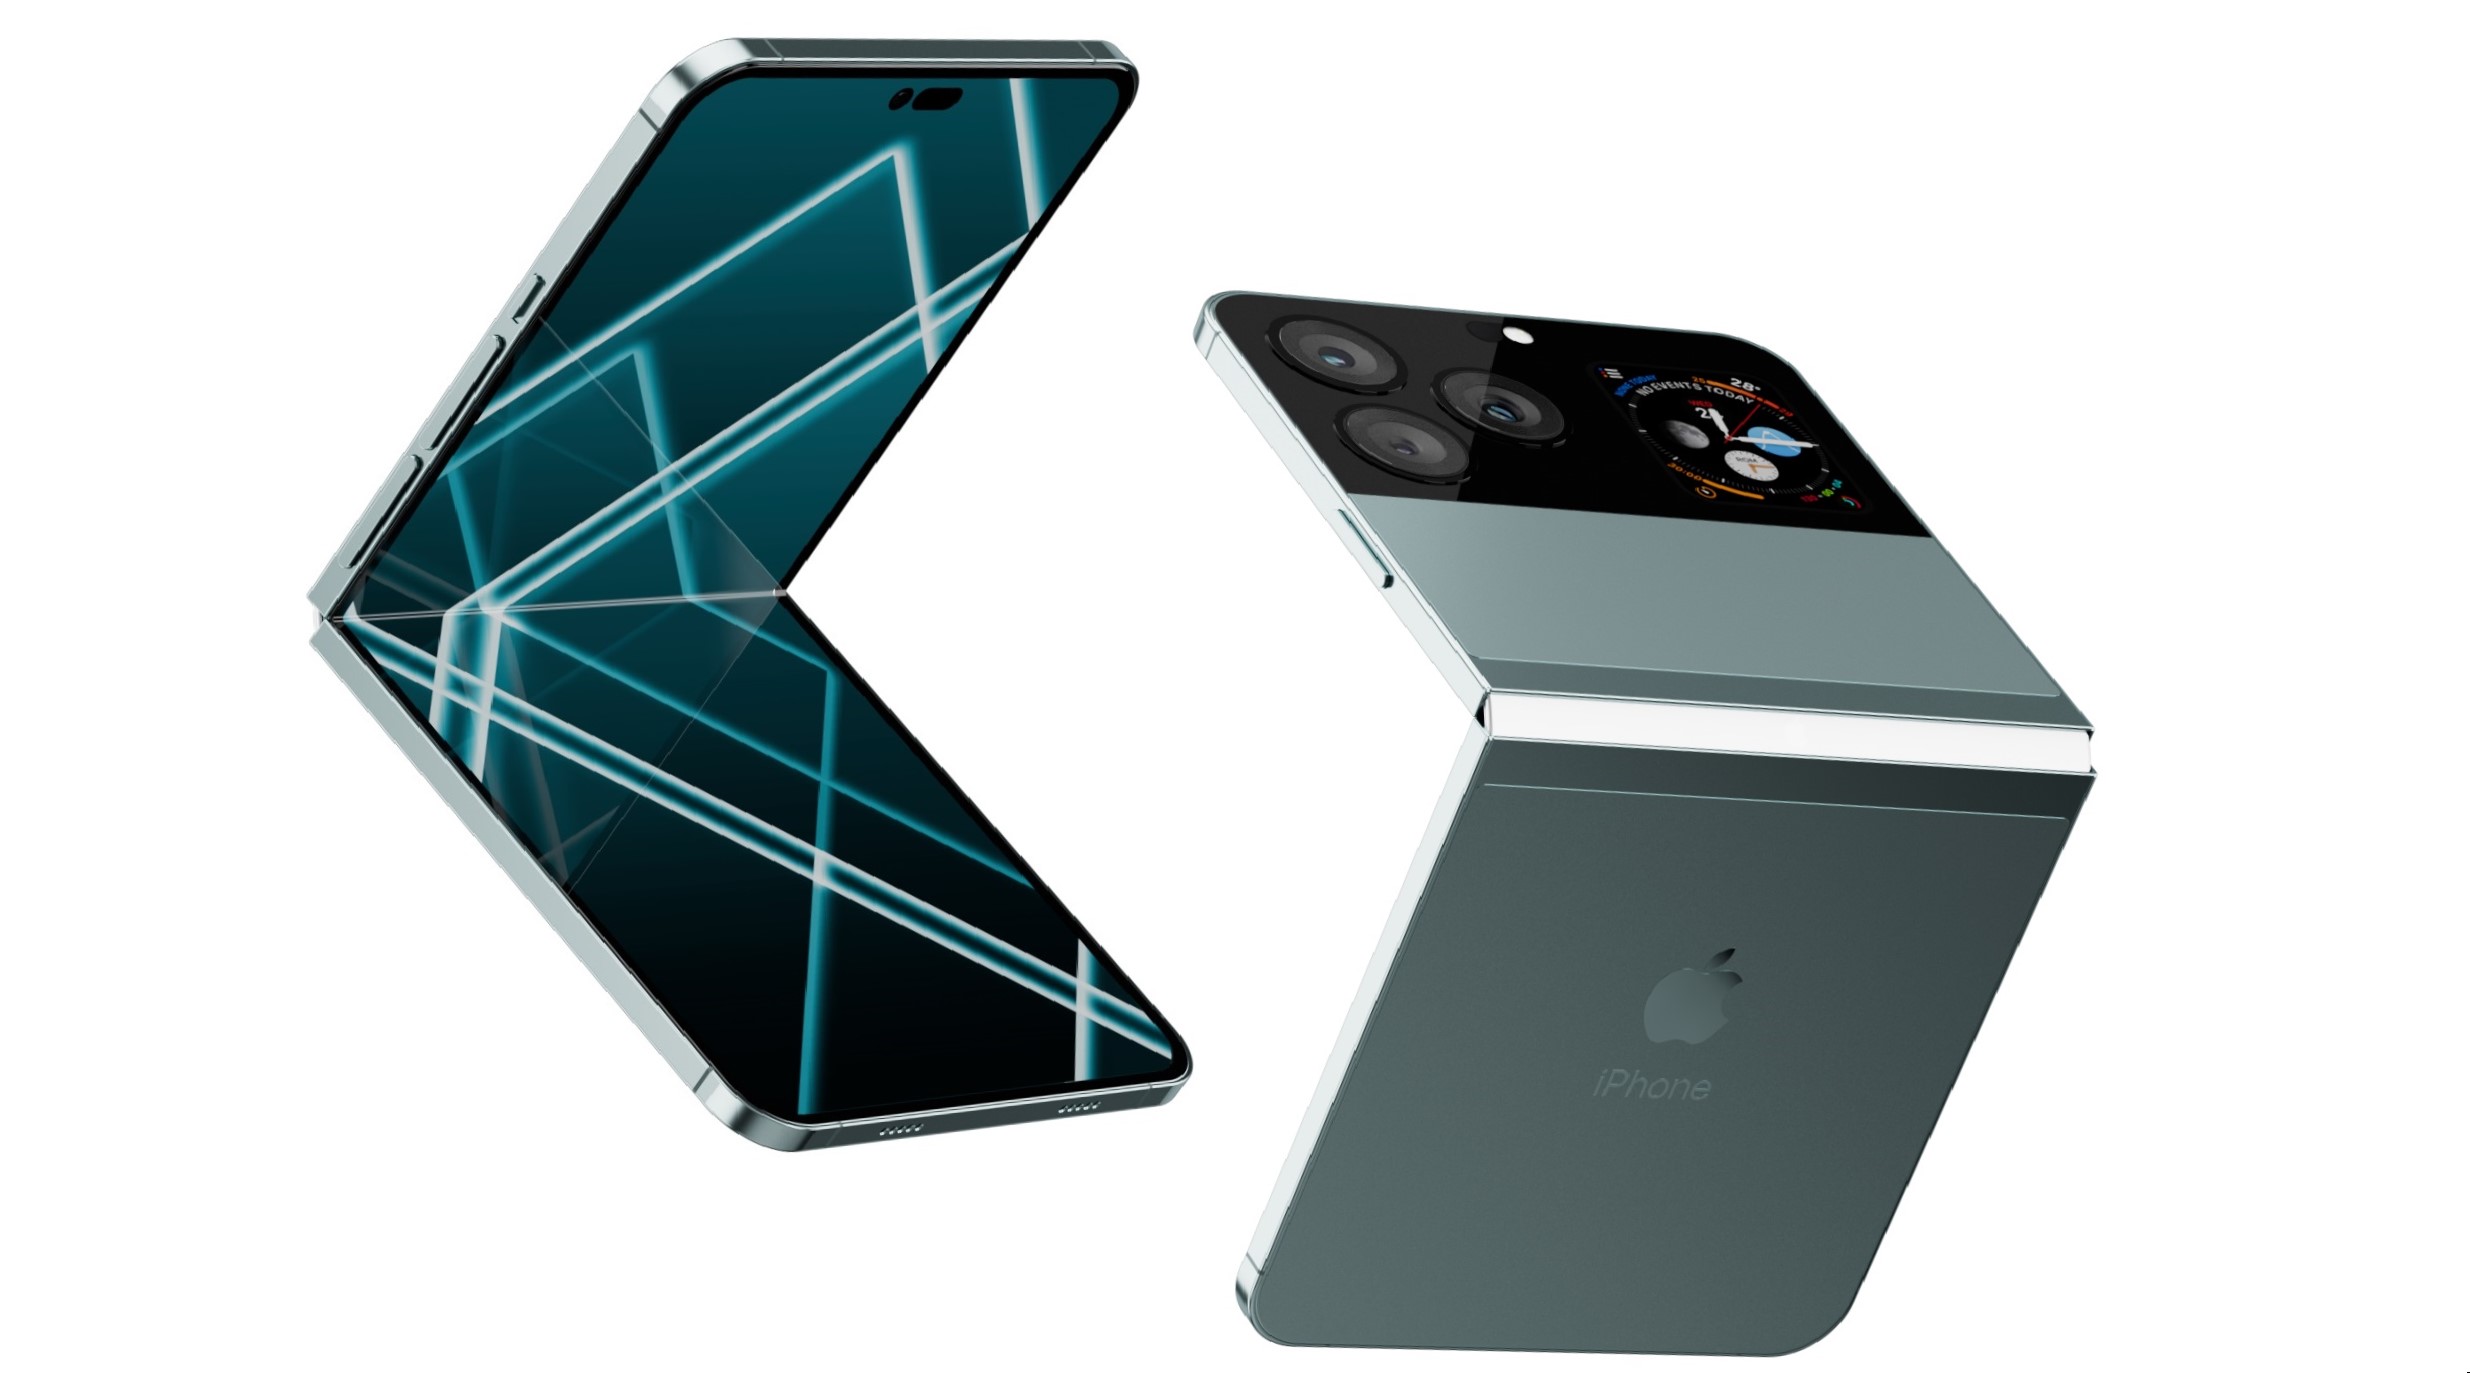 Iphone Flip And Fold: Inside Rumors On Apple'S First Foldable, Bendable  Phone | Imore